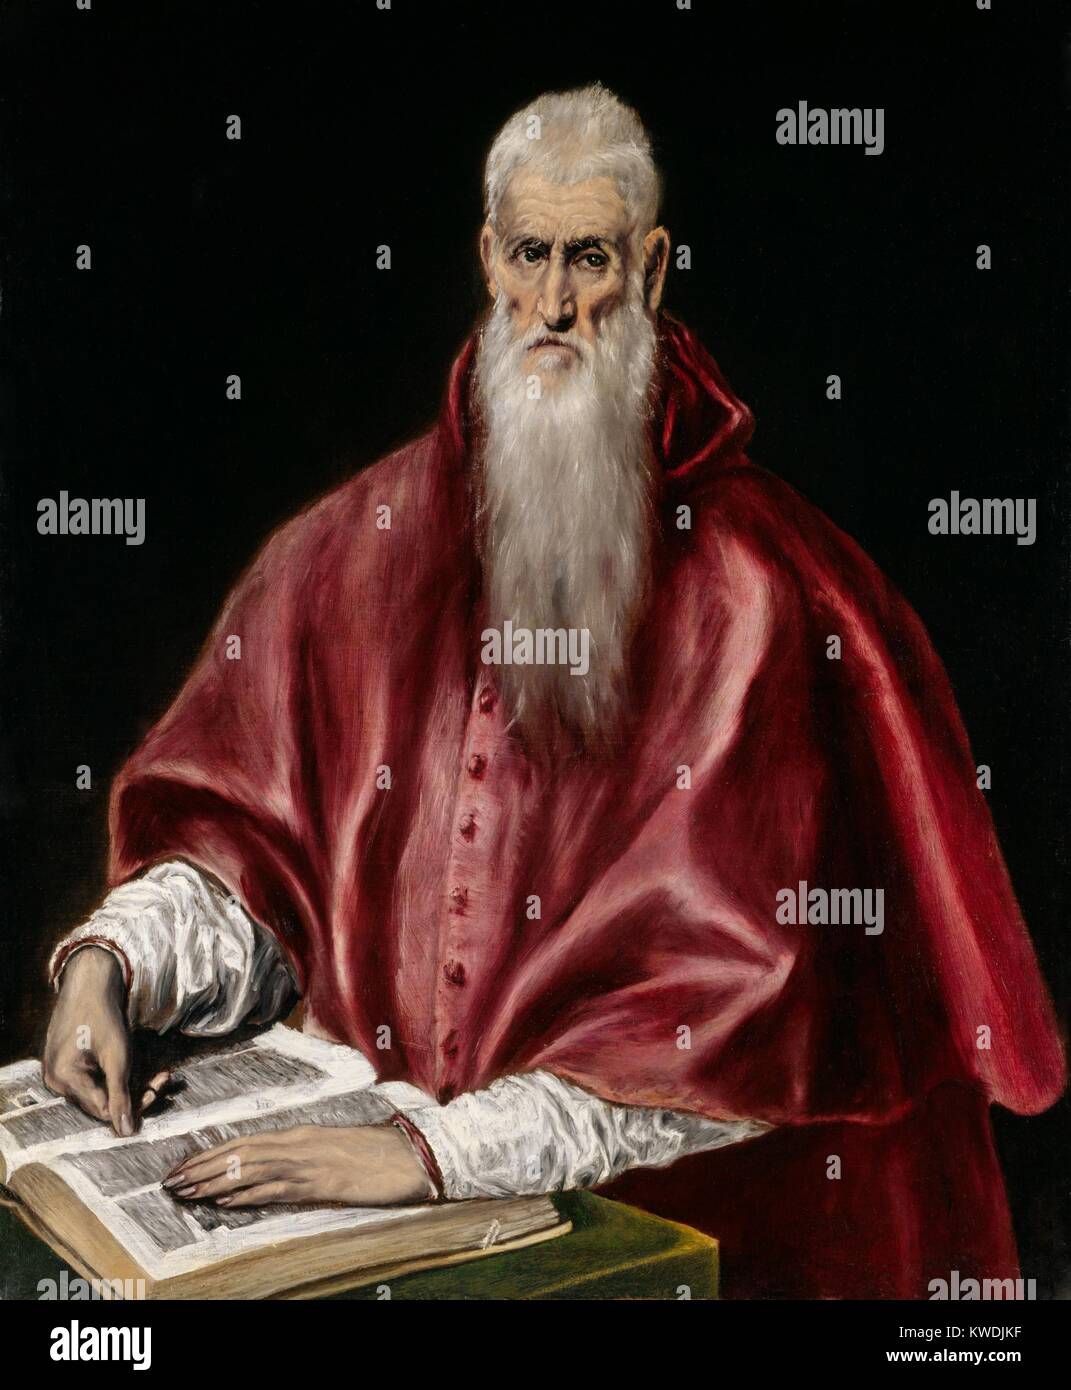 ST. JEROME AS SCHOLAR, by El Greco, 1610, Spanish Renaissance painting, oil on canvas. Jerome is shown in the red vestments of a Roman Catholic cardinal, before an open book, indicating his role as translator of the Bible from Greek into Latin in the 5th century (BSLOC 2017 16 70) Stock Photo